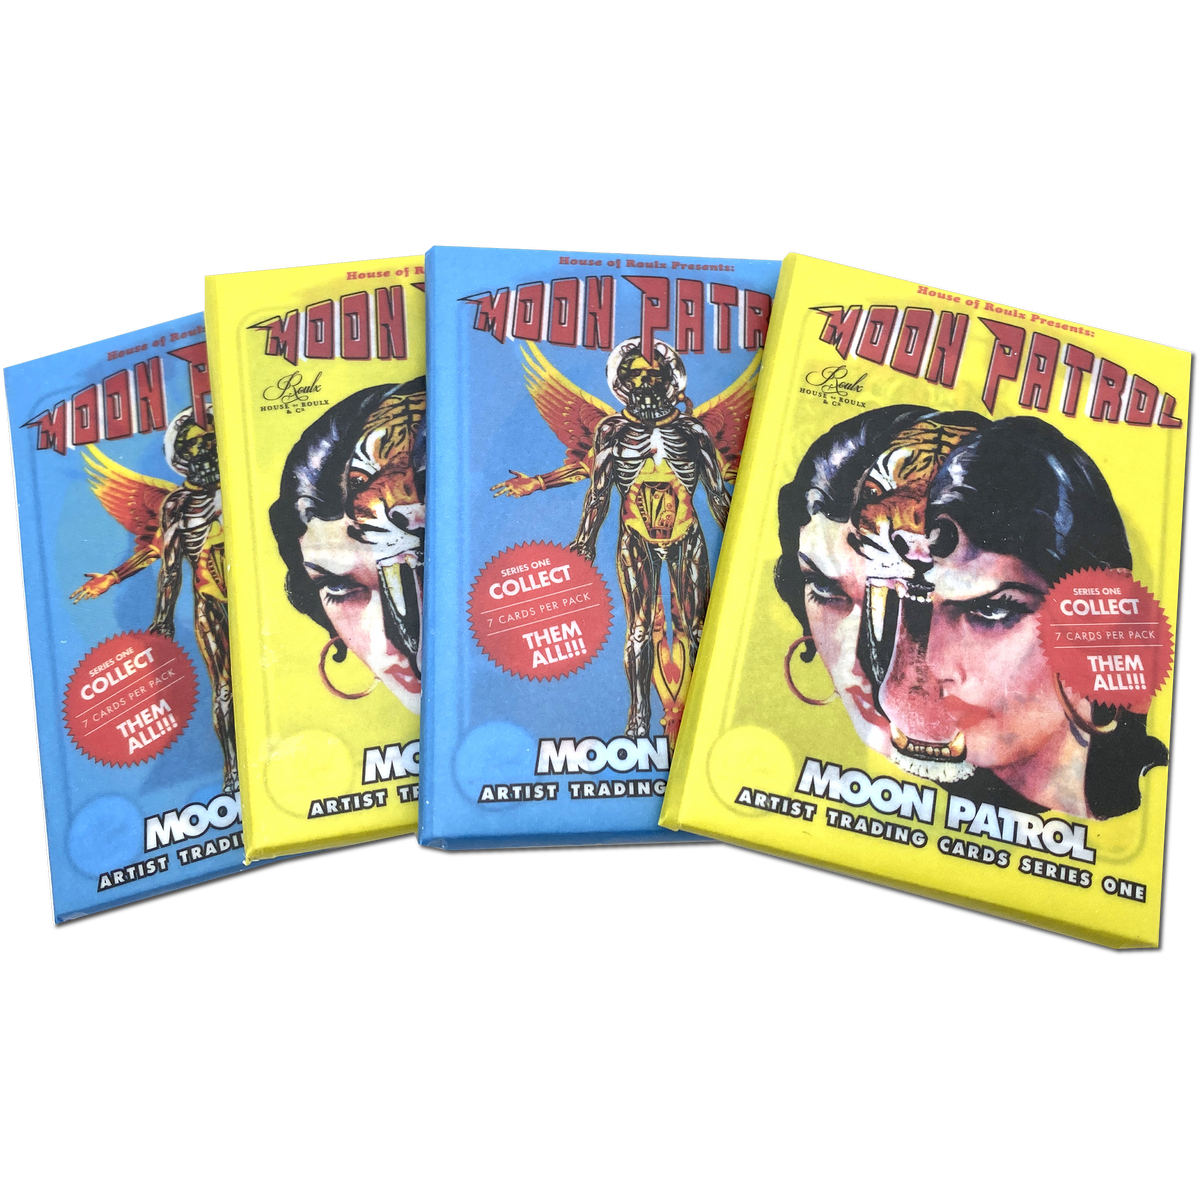 Moon Patrol - Artist Trading Cards Series One - Factory Sealed Box